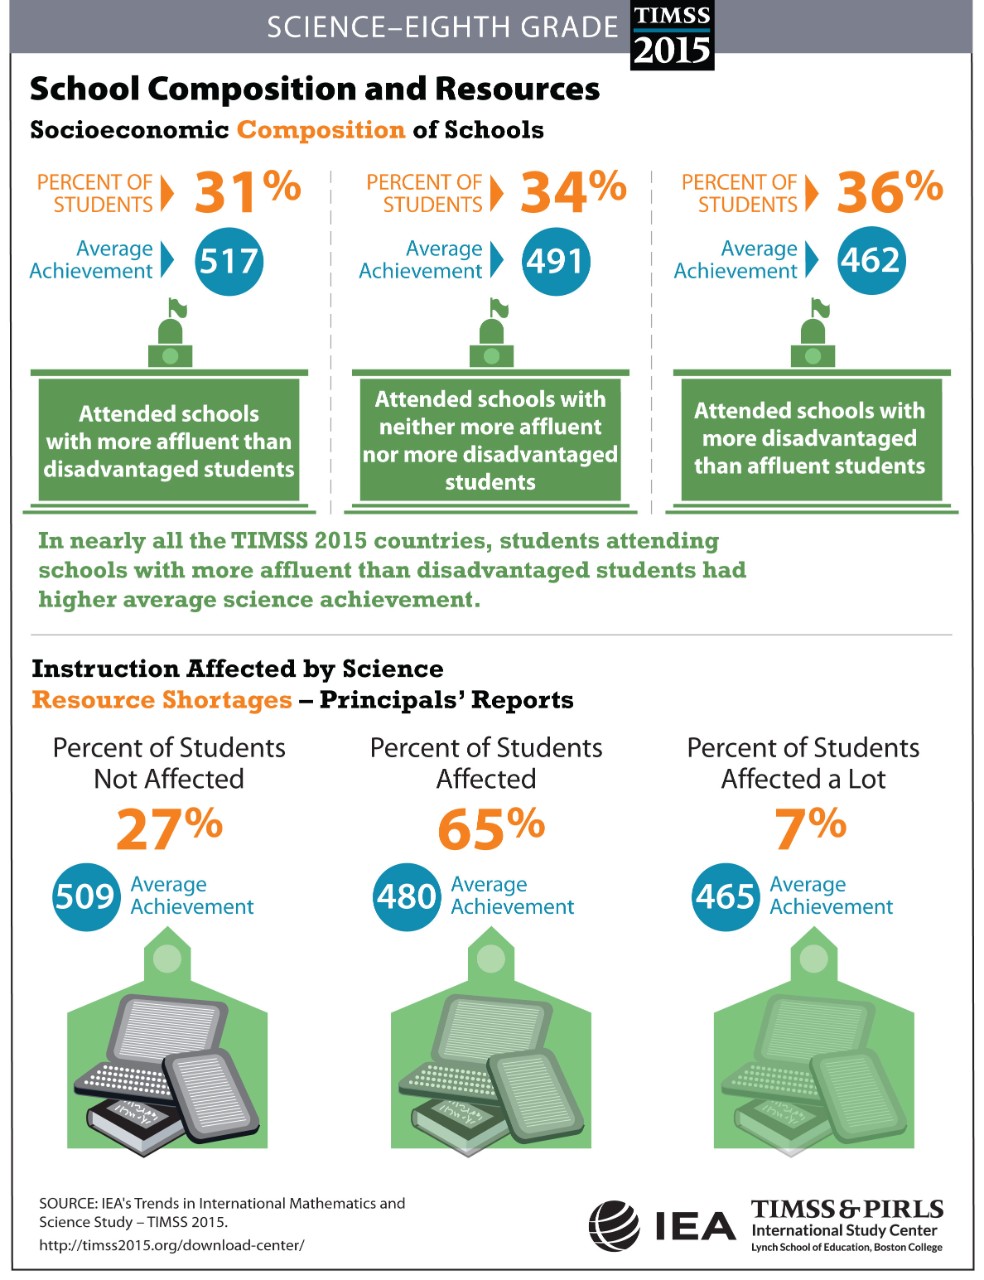 TIMSS 2015: achievement in science at the 8th grade level